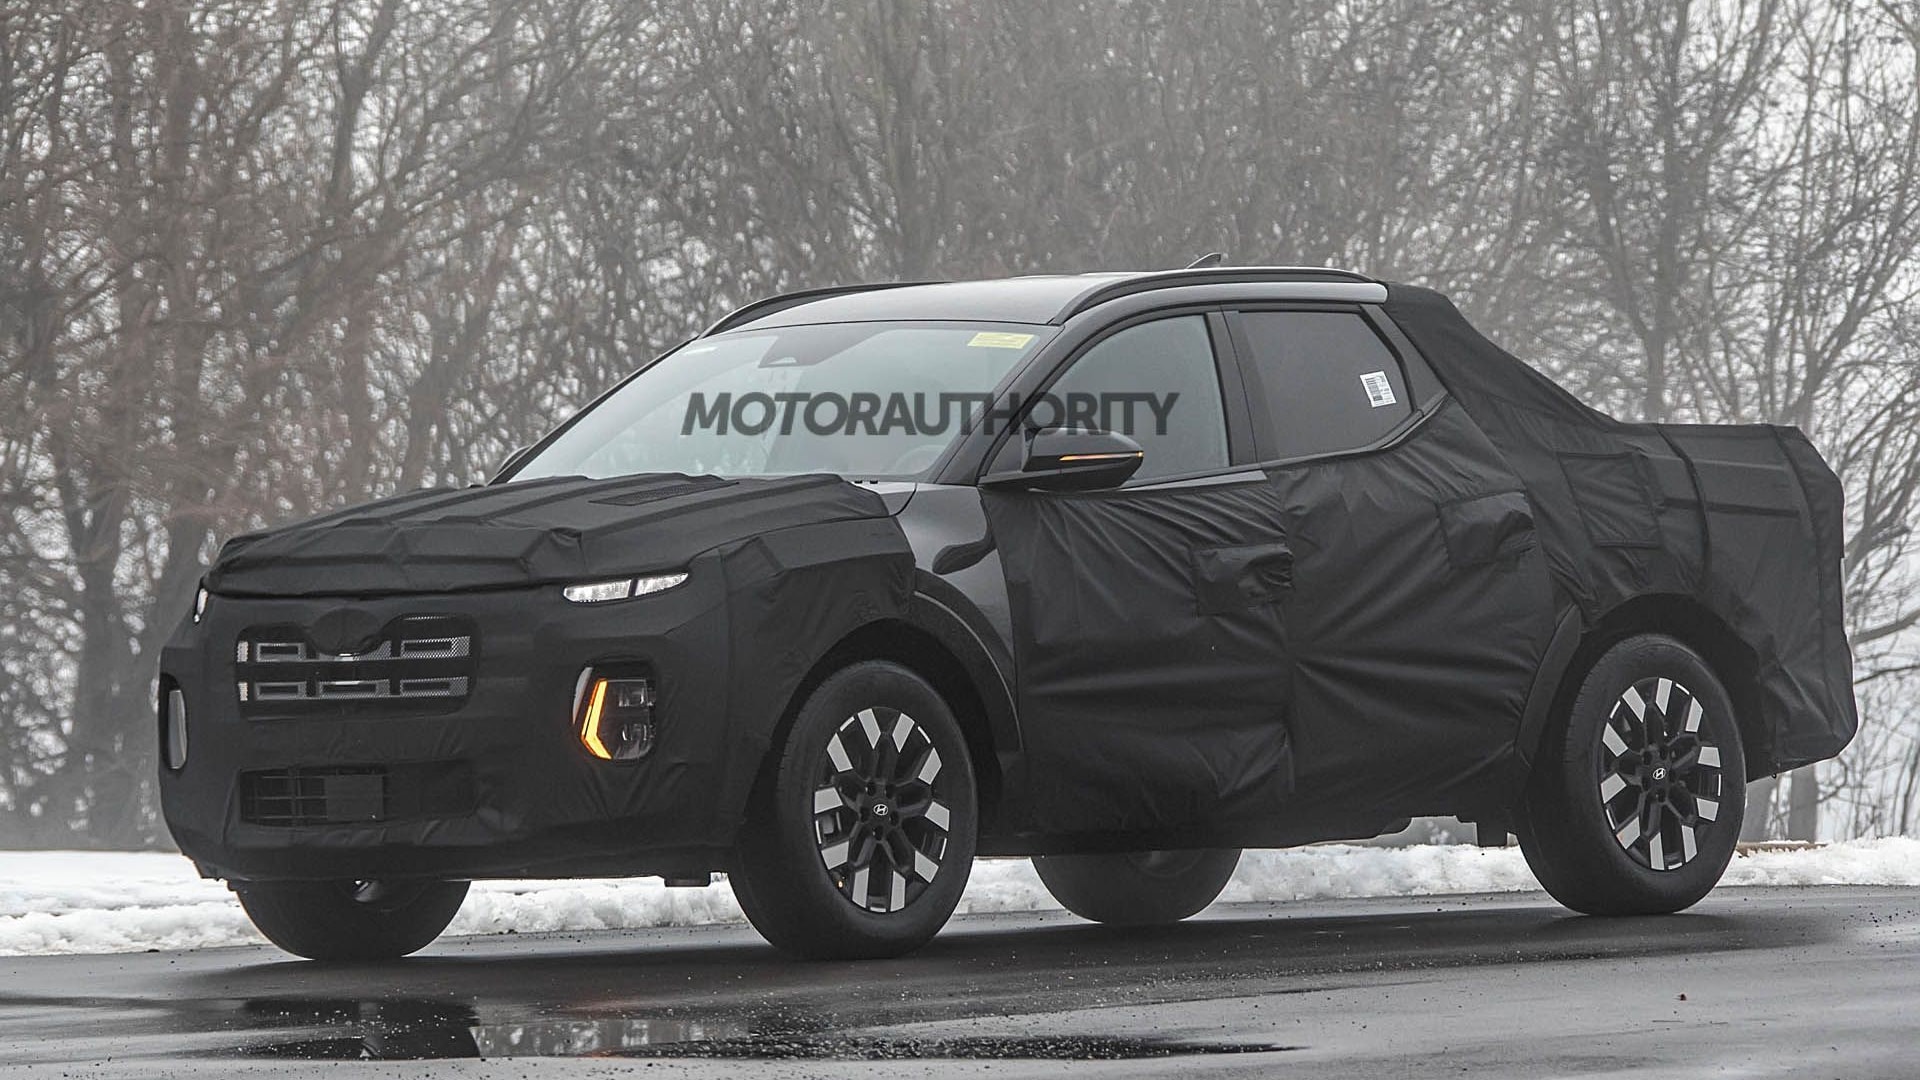 Car Spy Shots, News, Reviews, and Insights - Motor Authority